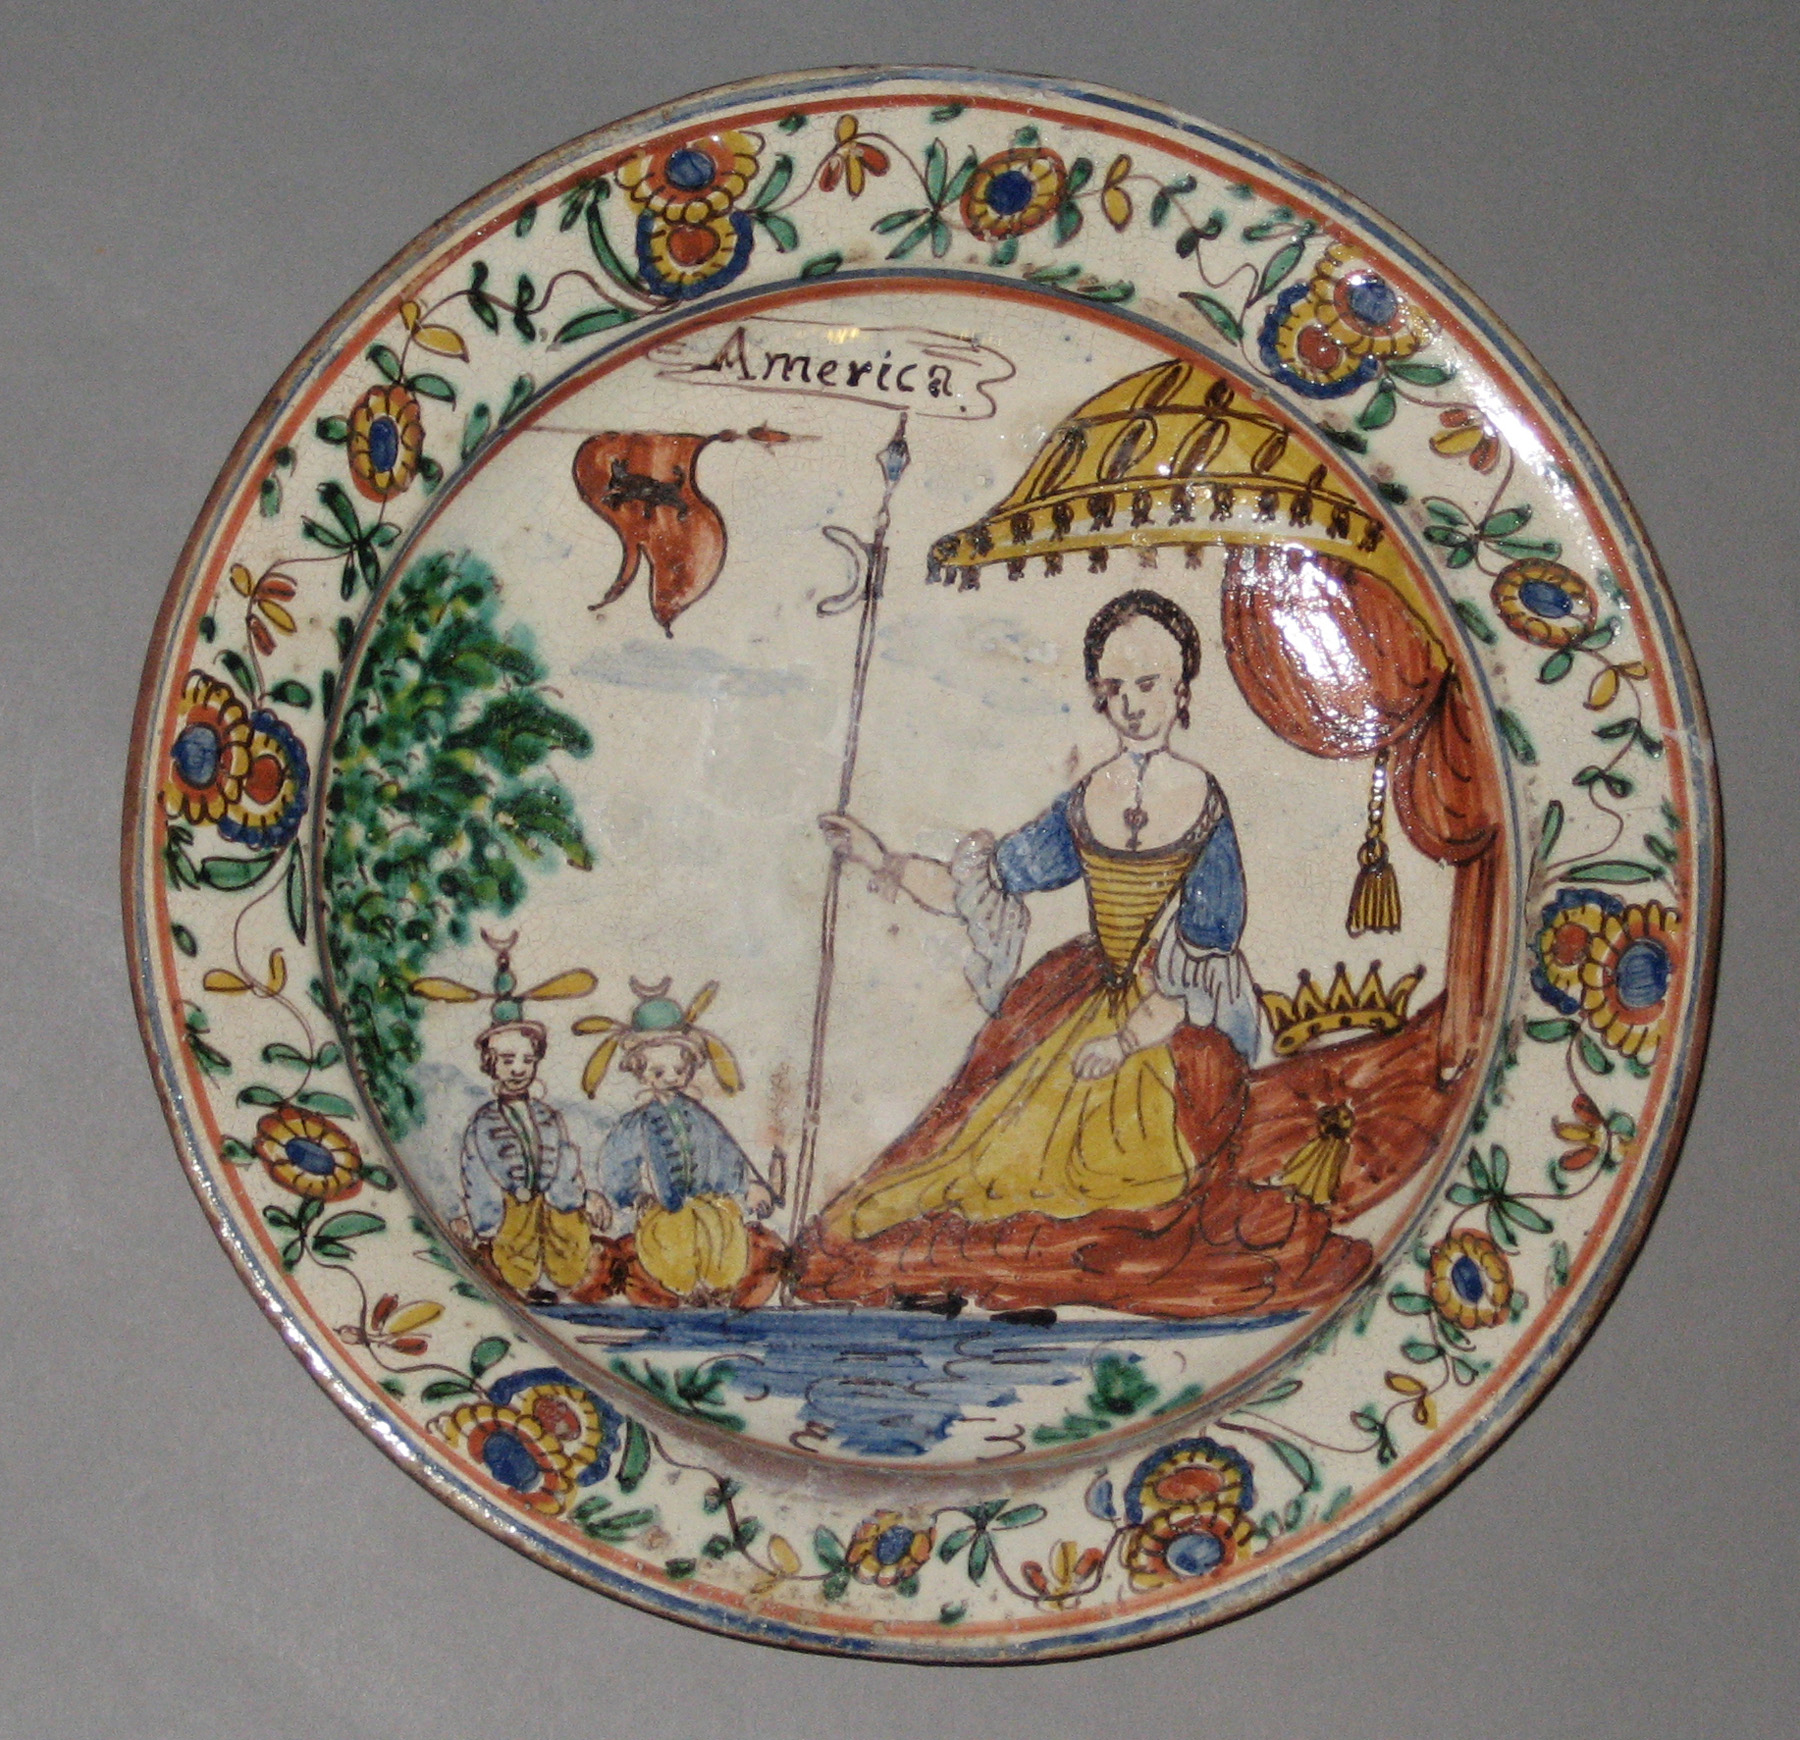 1963.0926 Delftware, faience or maiolica dish